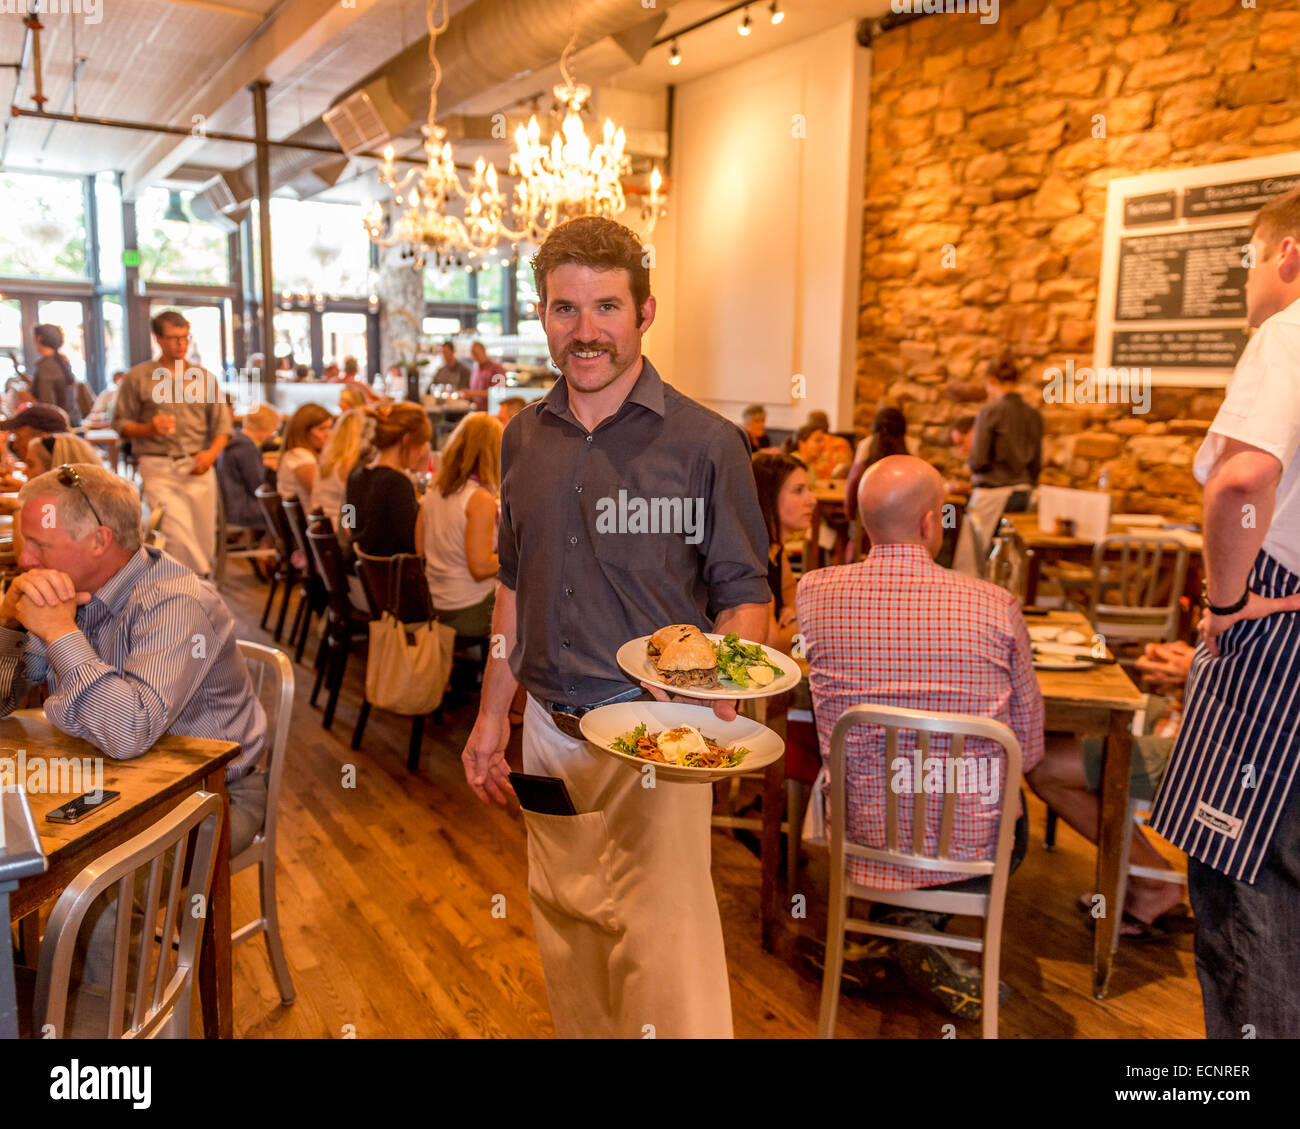 Waiter Carrying Food Plates At The Kitchen Restaurant Boulder Stock Photo Alamy